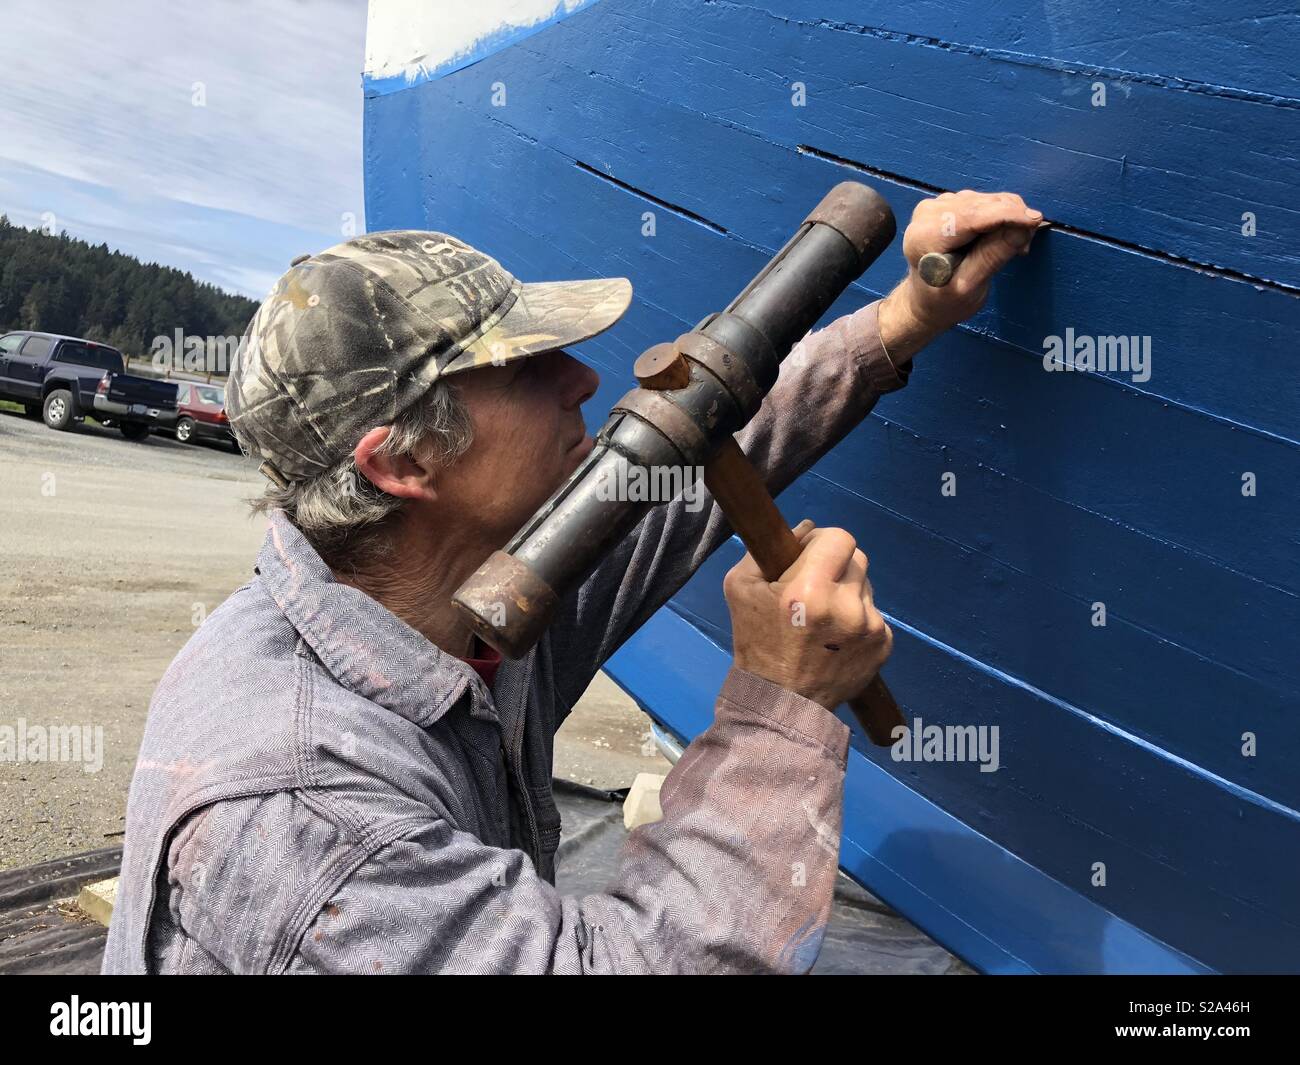 Historic fishing vessel owner and captain demonstrates the use of traditional boatbuilding techniques, materials and tools to maintain his 100 year old wooden fishing boat. Stock Photo